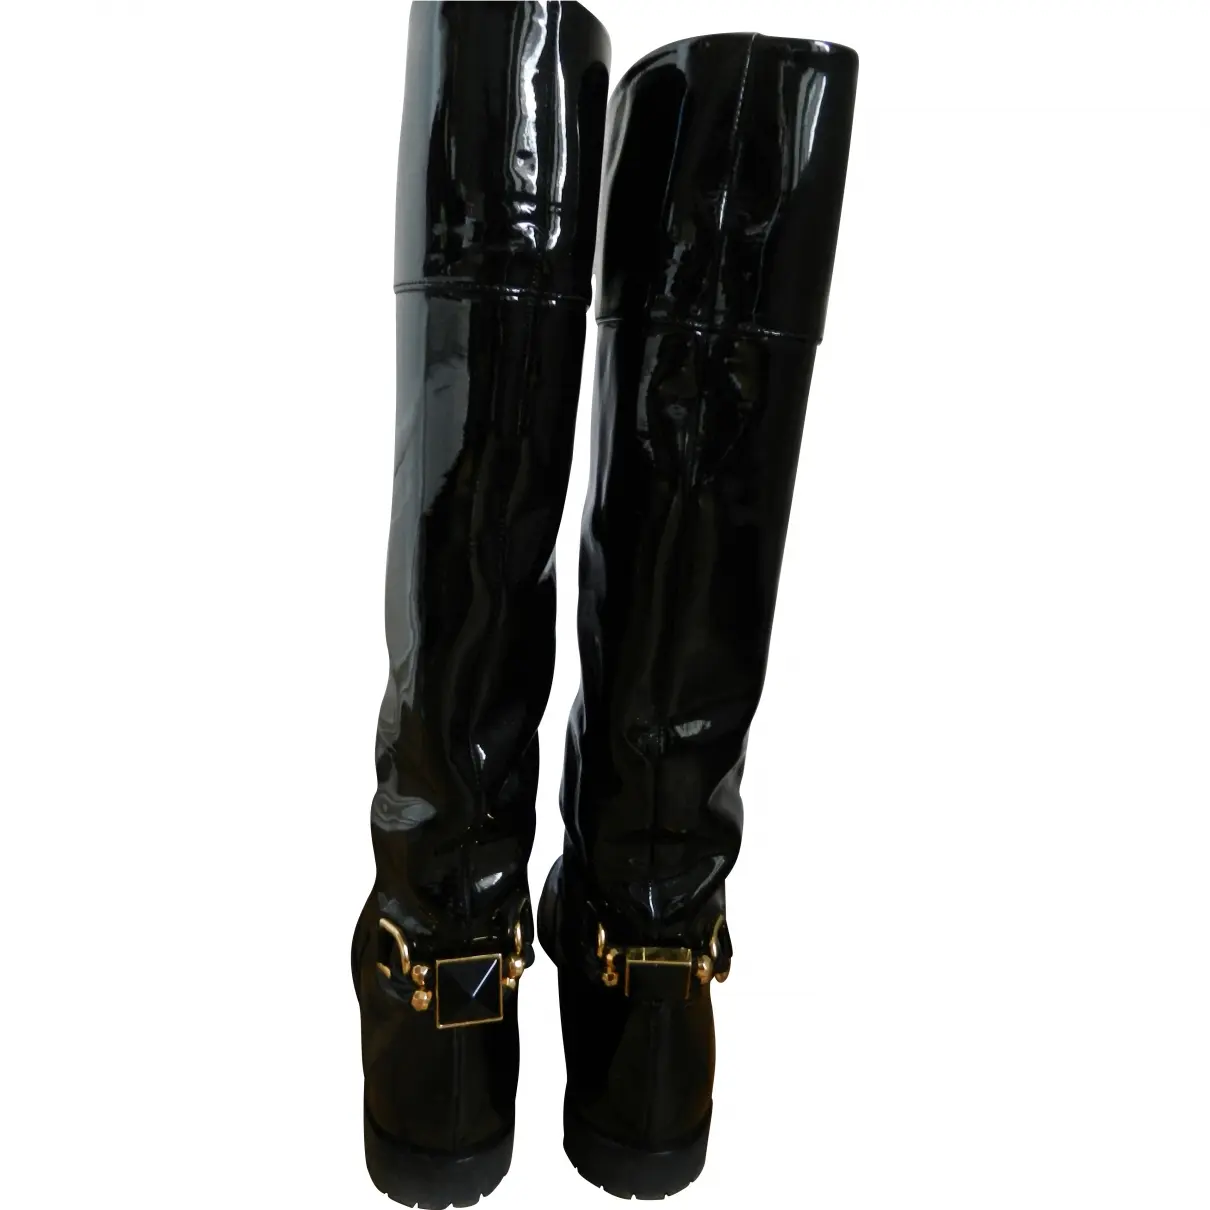 Buy Marc Jacobs Black Patent leather Boots online